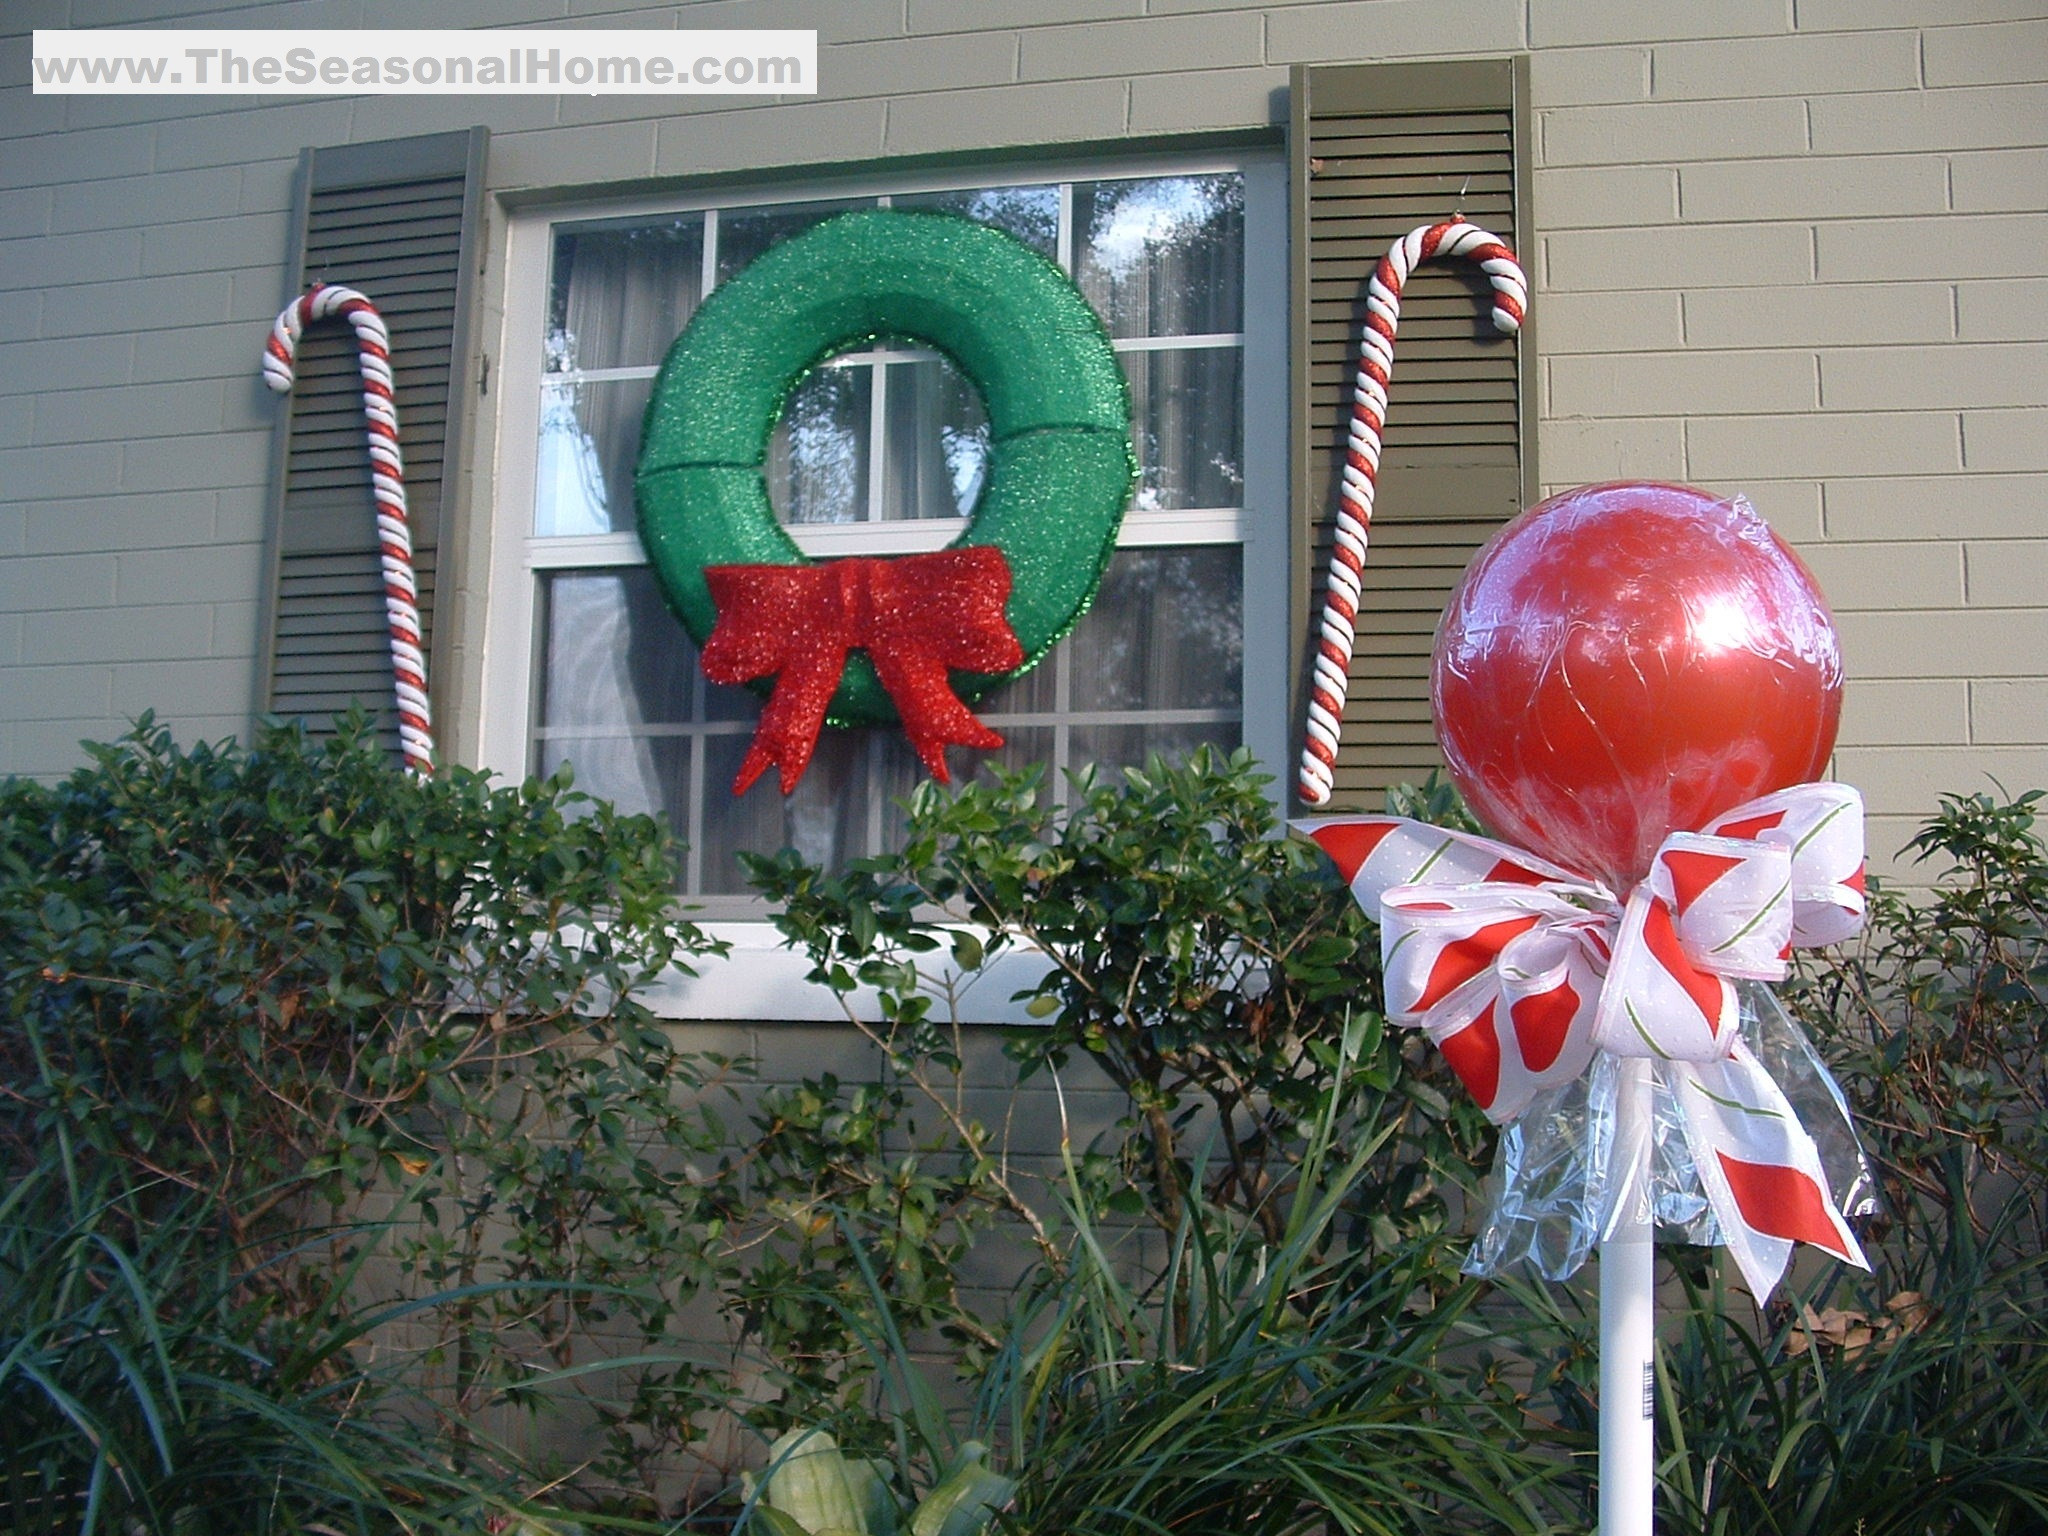 Christmas Yard Decorations Ideas
 Outdoor “CANDY” A Christmas Decorating Idea The